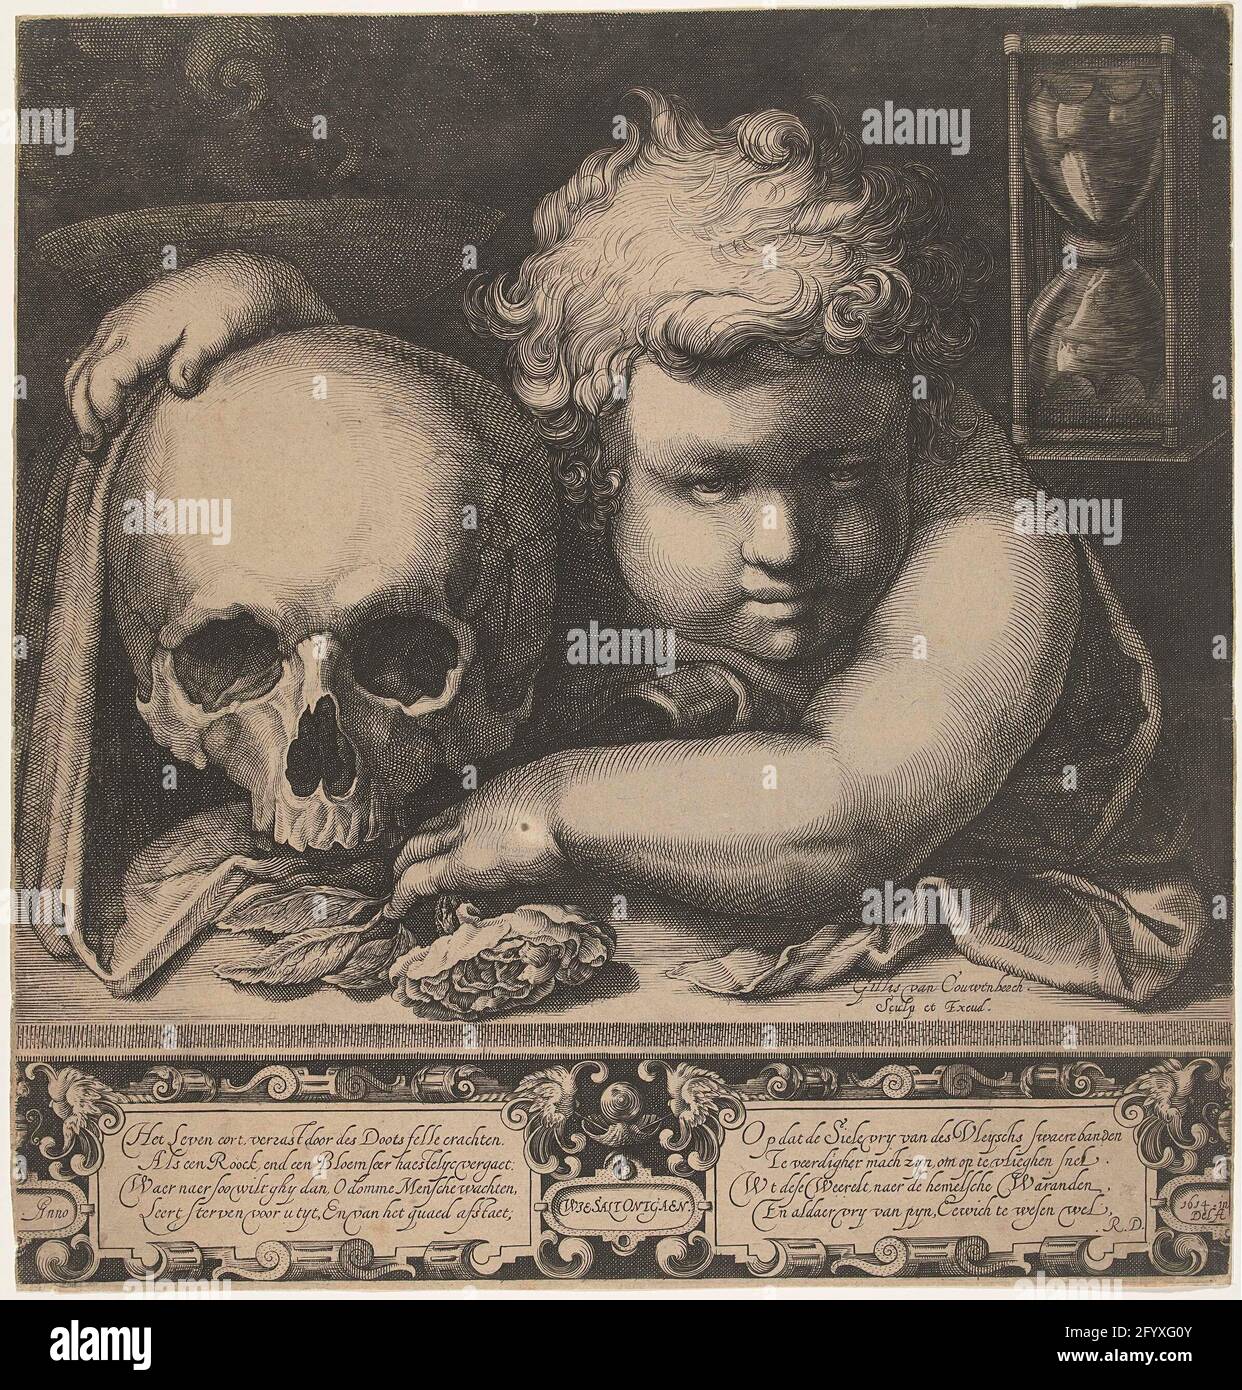 Whoever dodaed Sal't. Vanita window with a child leaning on a skull. Vanitassymbols such as links a bowl with burning incense and on the right an hourglass emphasize the message of the print. The rose in the child's hand also depicts the warning nature of the performance: the human life can be just like the smell of the rose of short duration. Stock Photo